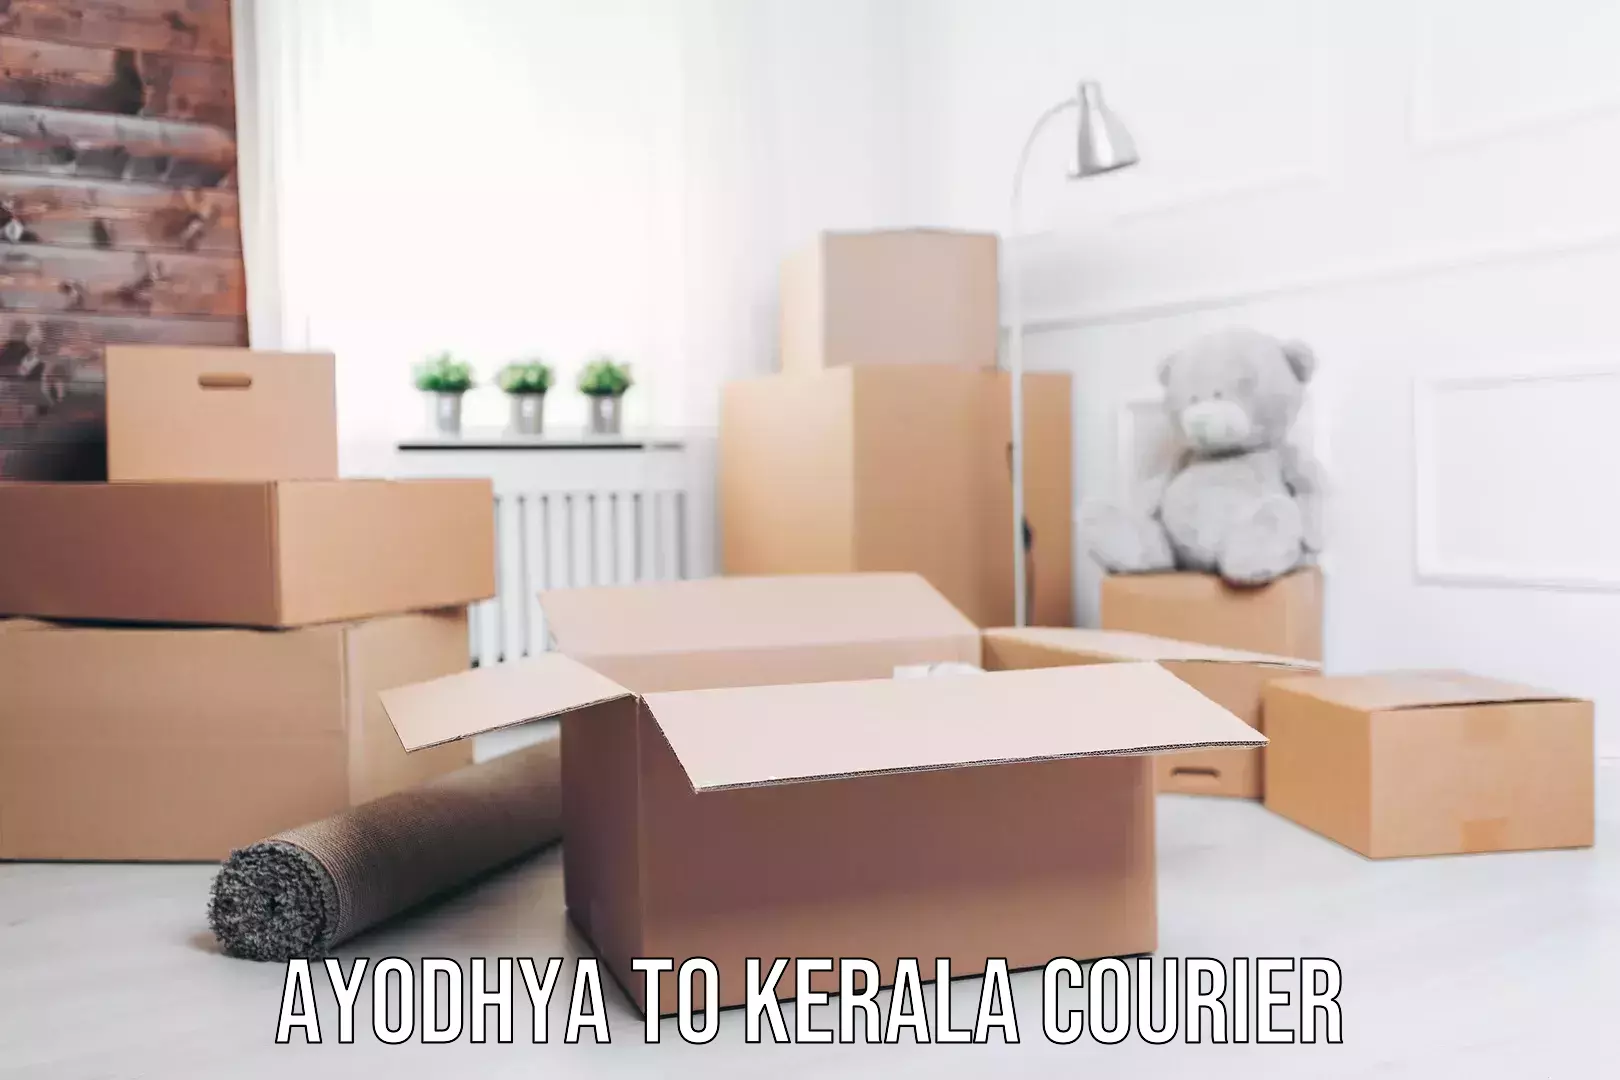 Business delivery service Ayodhya to Kerala